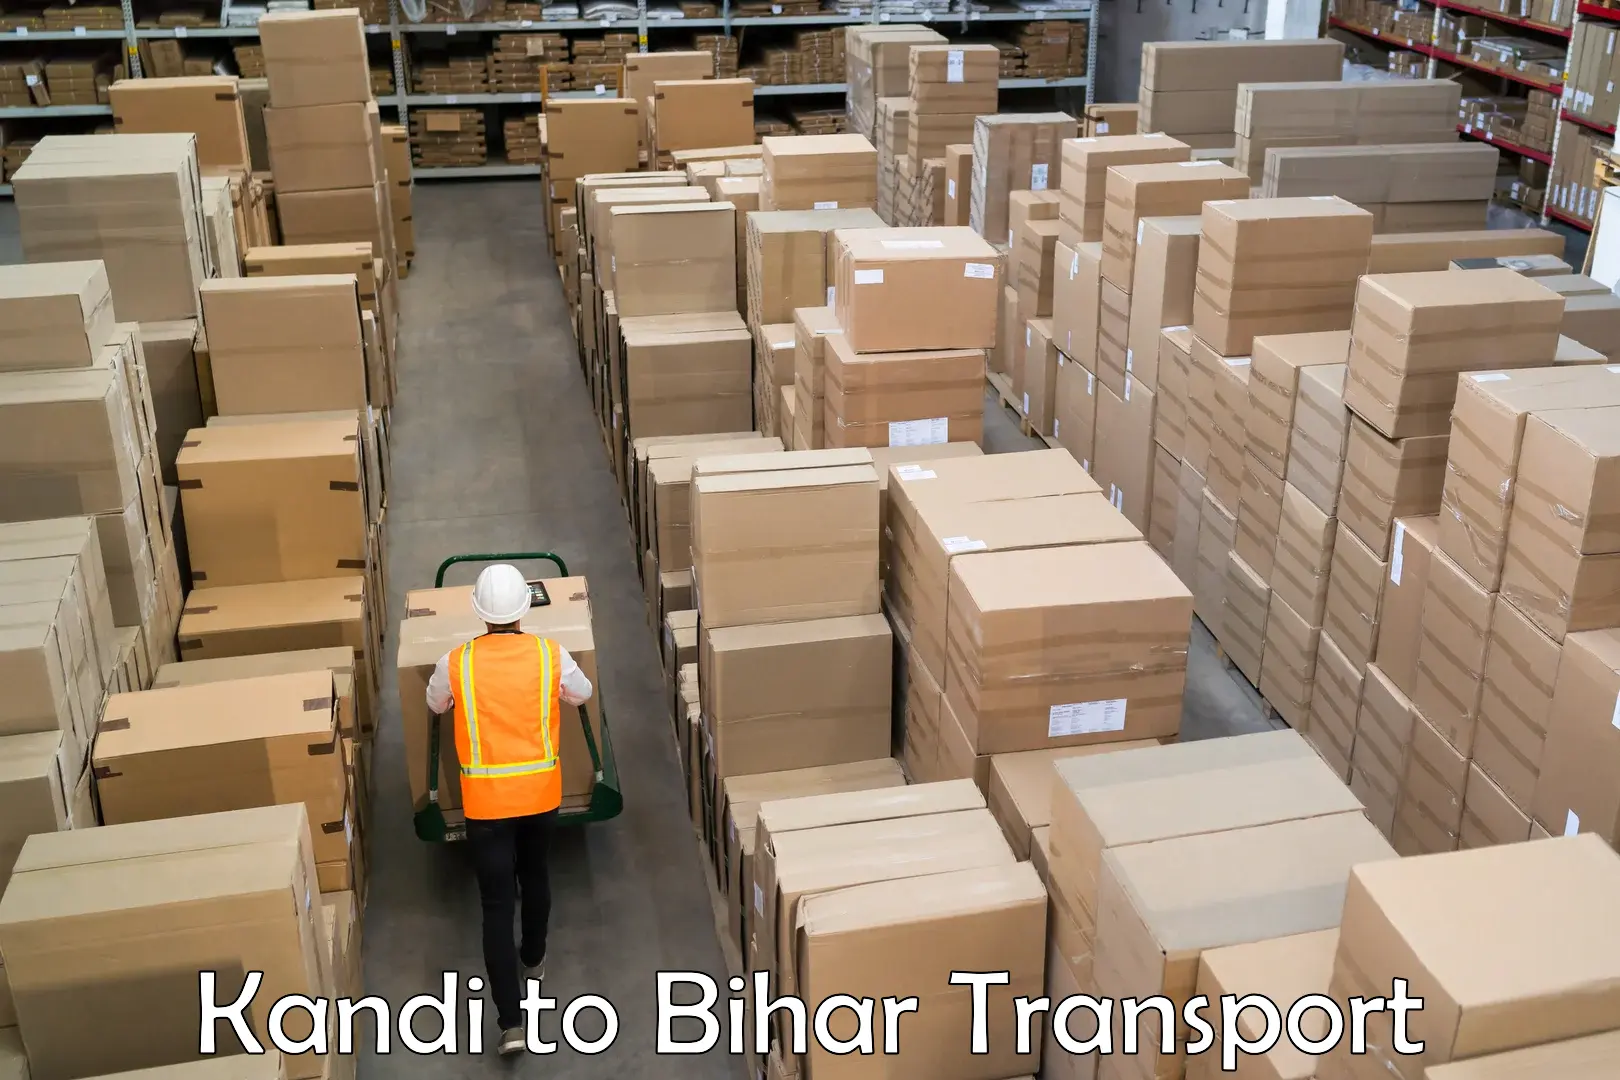 Goods delivery service Kandi to Dhaka